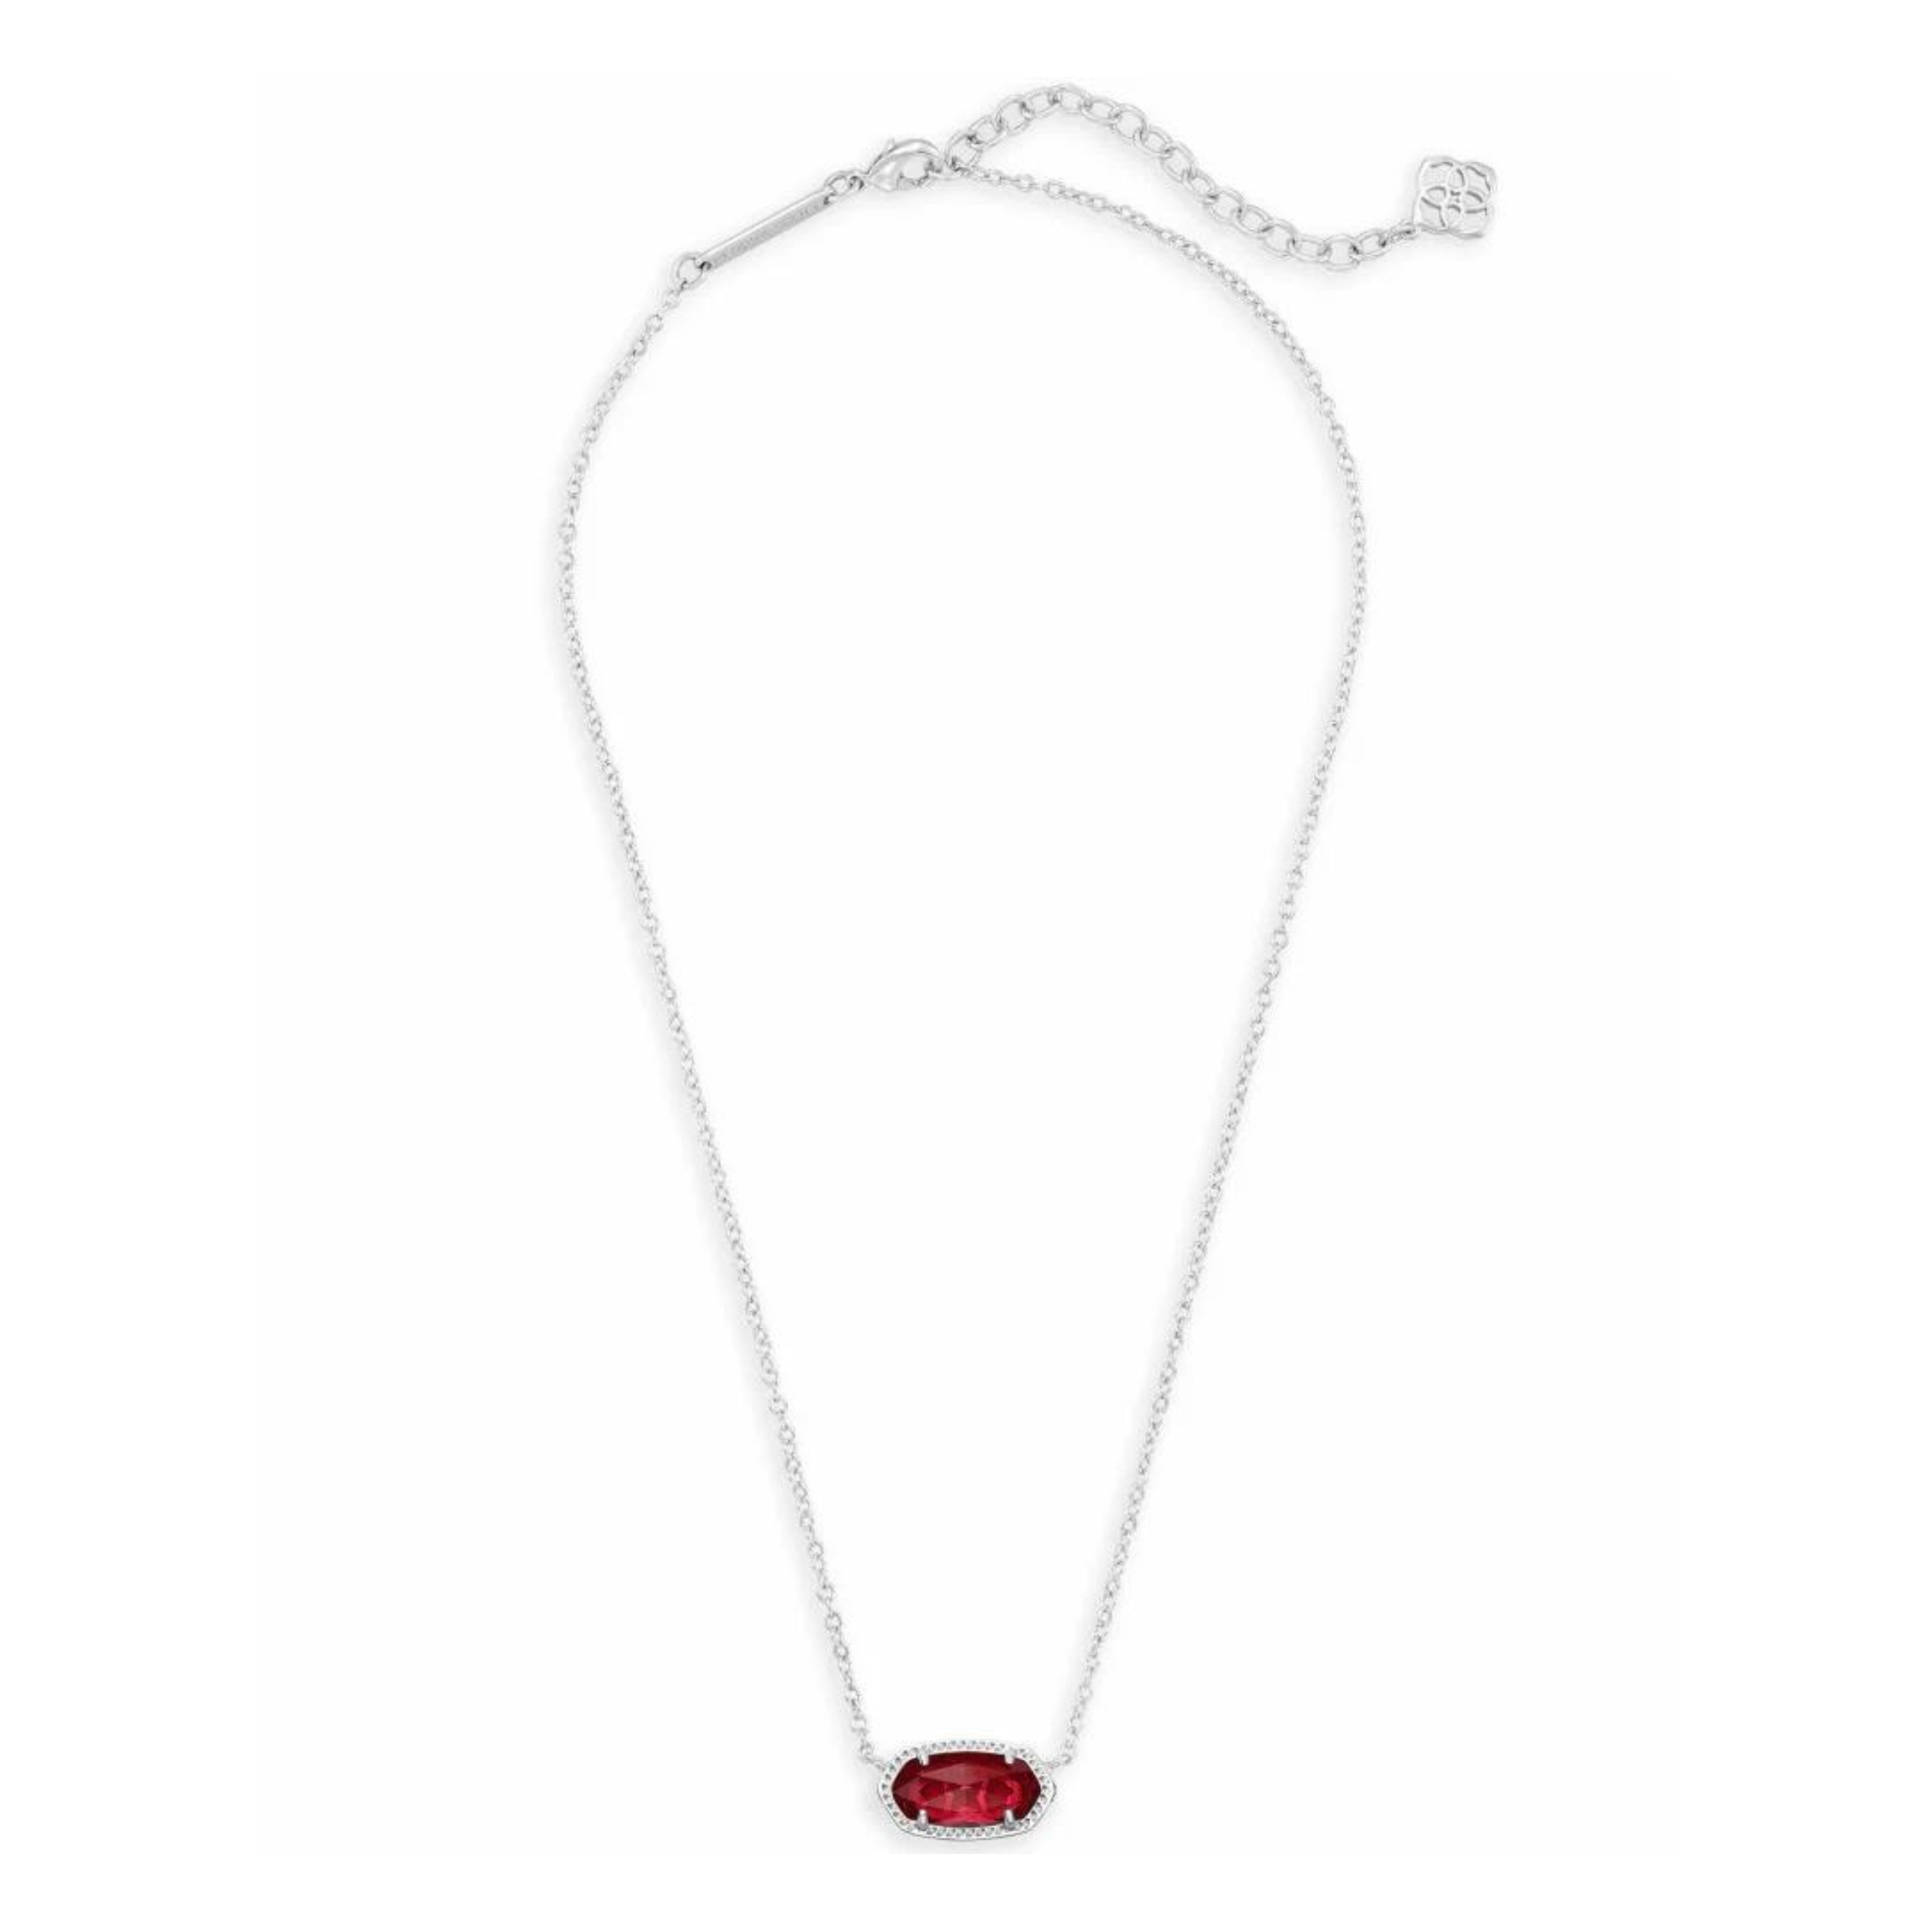 Kendra Scott | Elisa Silver Pendant Necklace in Clear Berry - Giddy Up Glamour Boutique